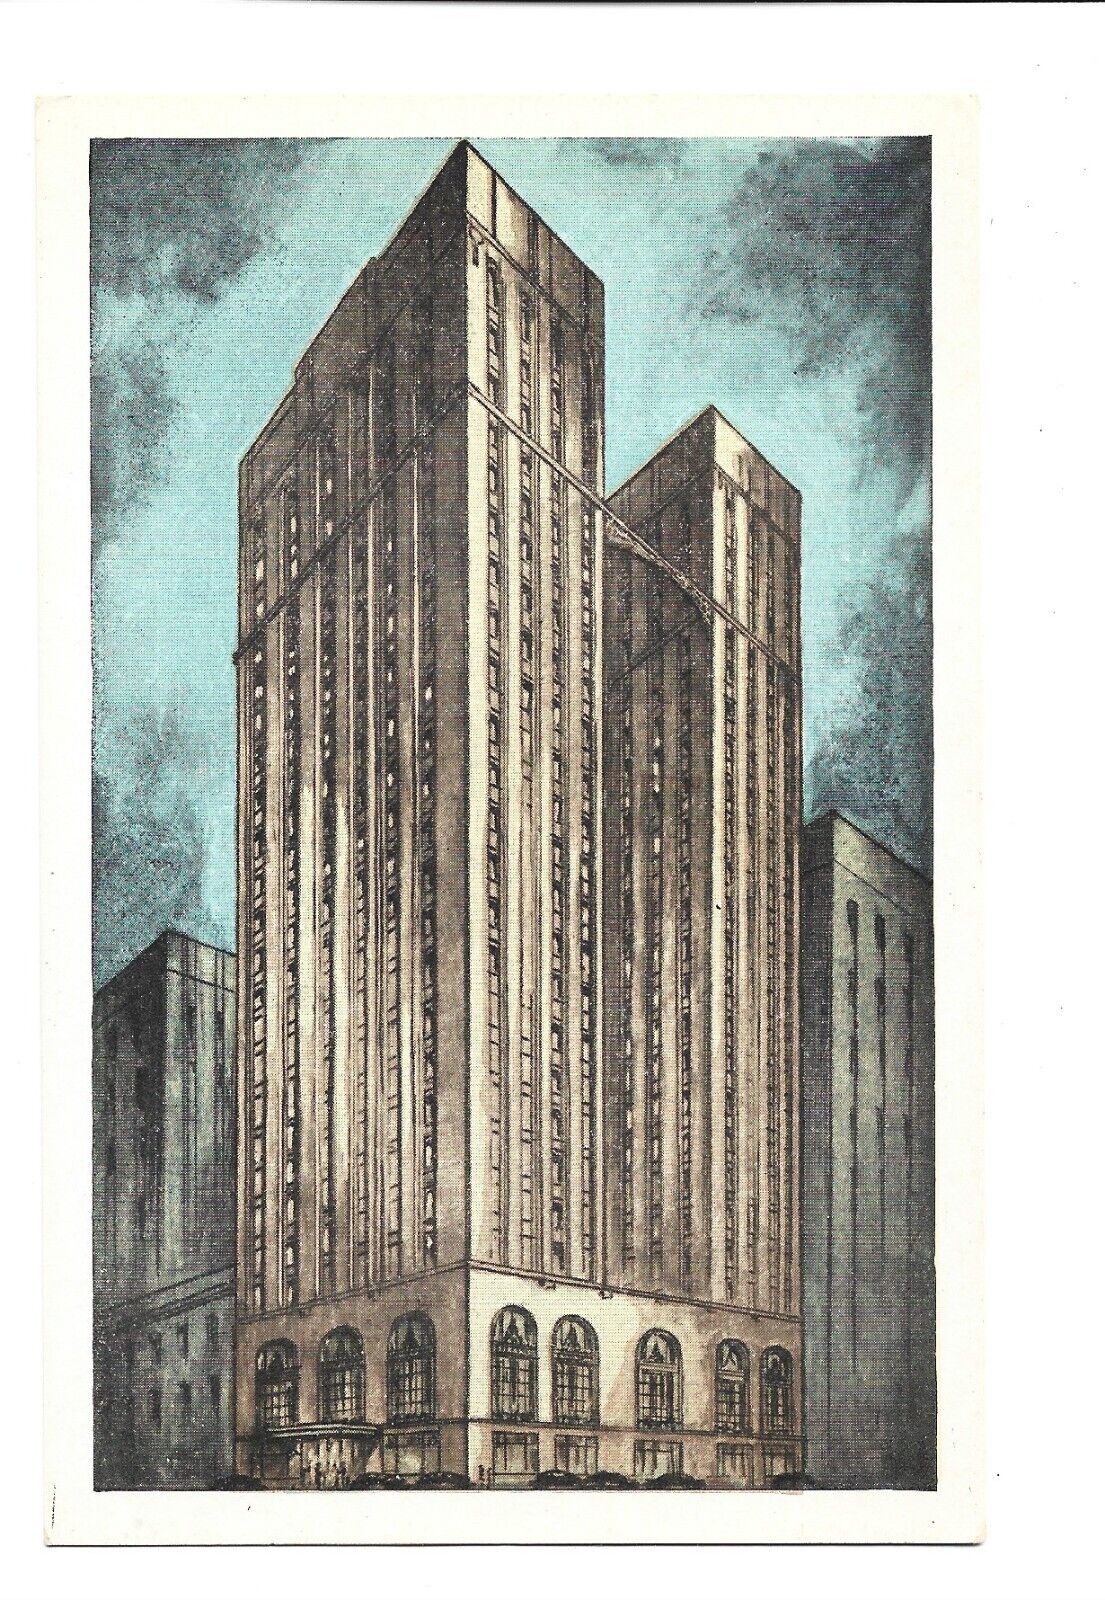 VINTAGE-THE PITTSBURGHER HOTEL-PITTSBURGH,PA.